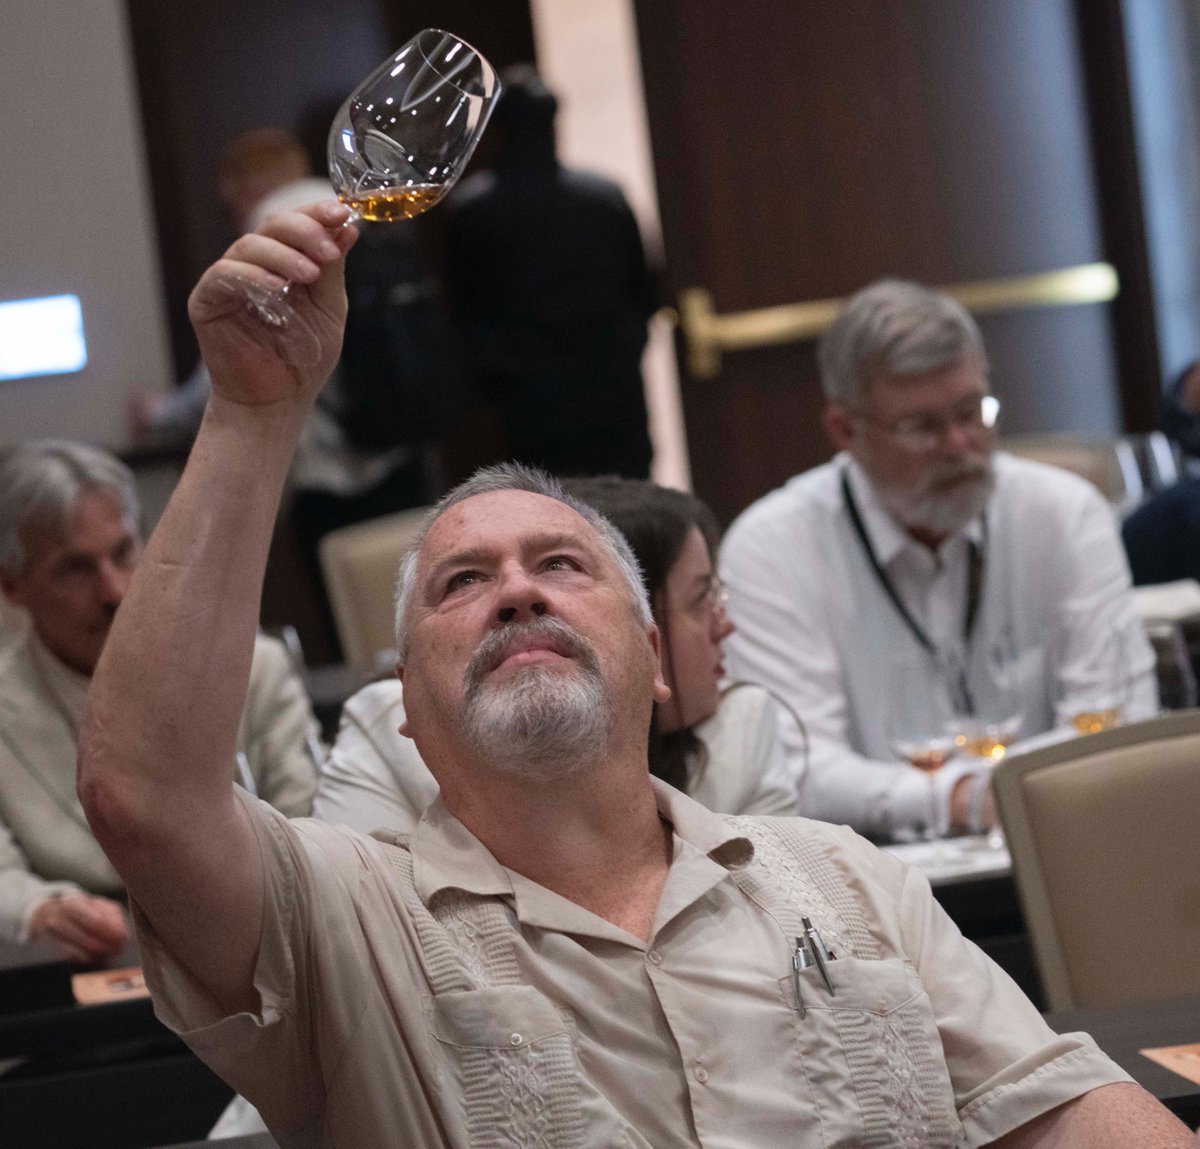 Enhance your knowledge by attending a Master Class st WhiskyFest. Purchase your tickets to one of our fall events now, at early bird prices. whiskyadvocate.com/whiskyfest #whiskyfest #whiskyfestsanfrancisco #whiskyfestnewyork #whiskyfestlasvegas #masterclass #whiskytasting